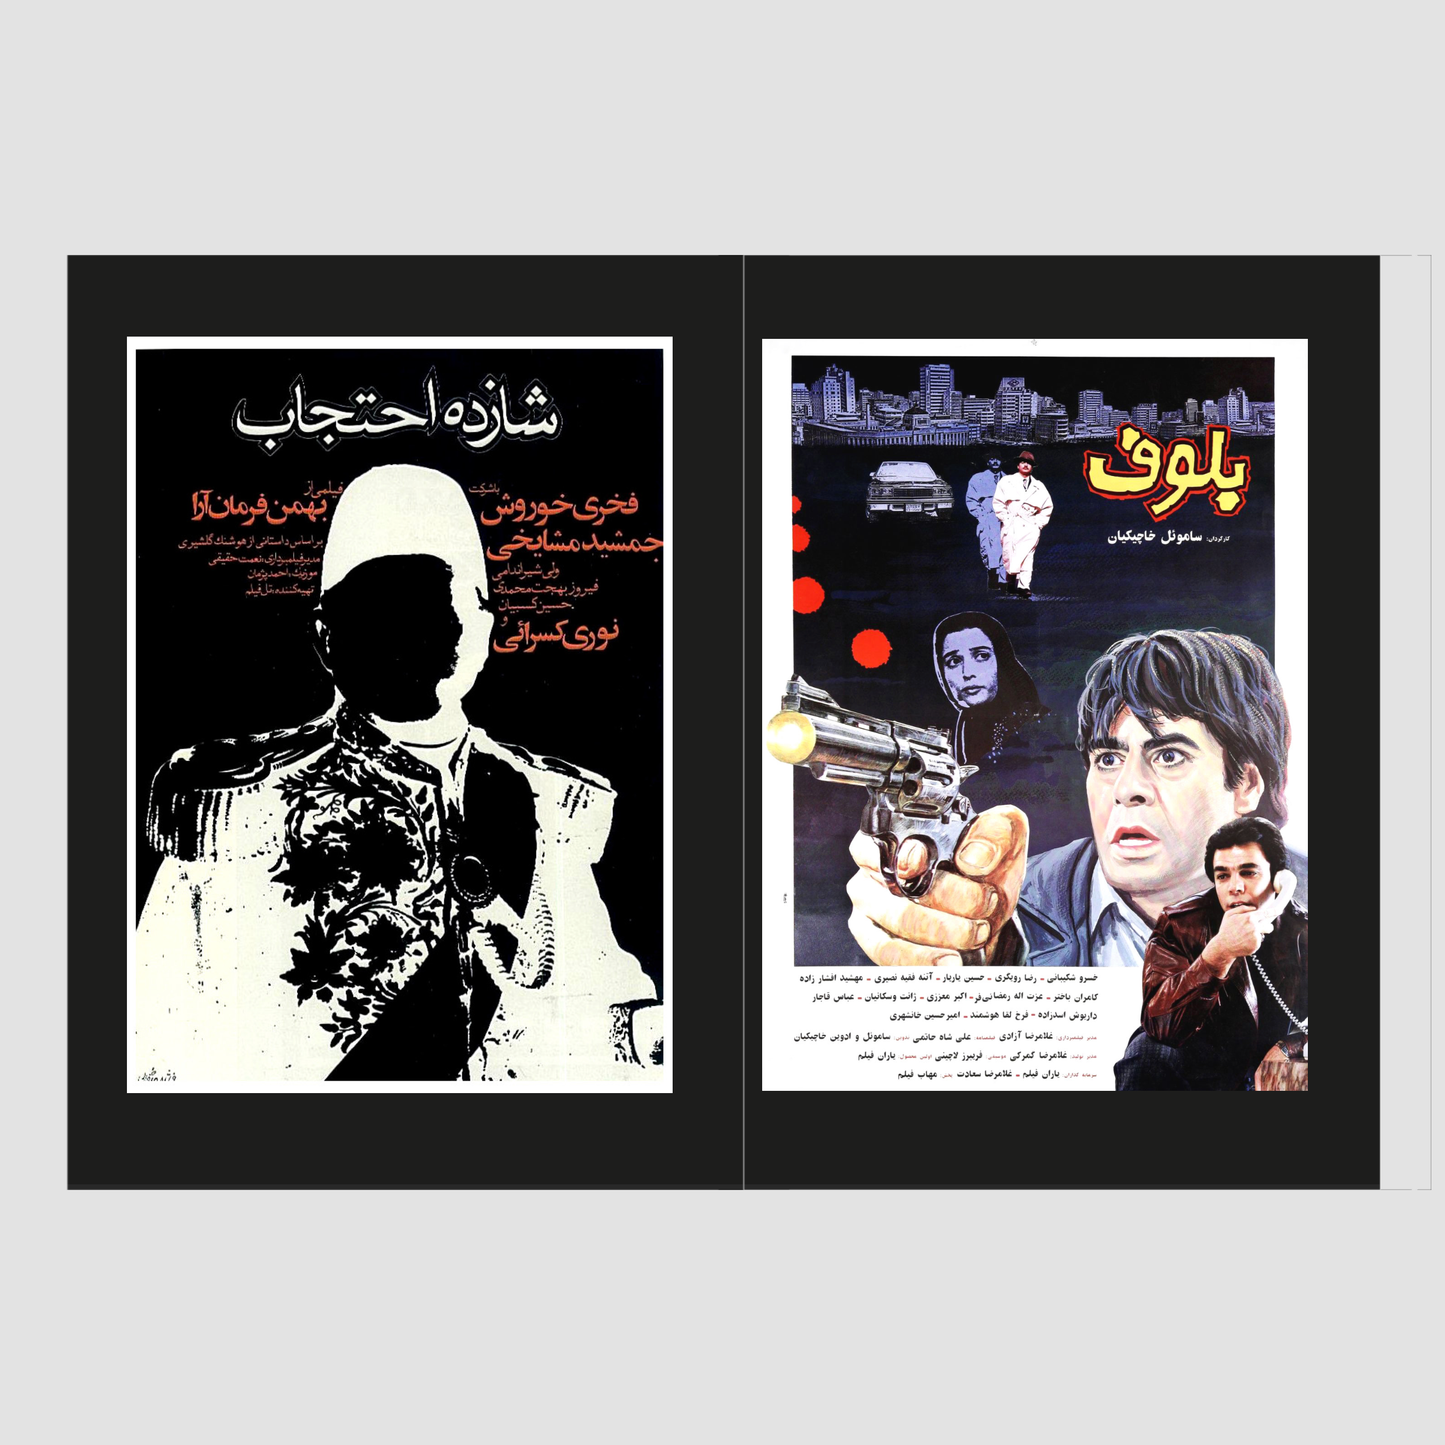 Movie Posters from Iran